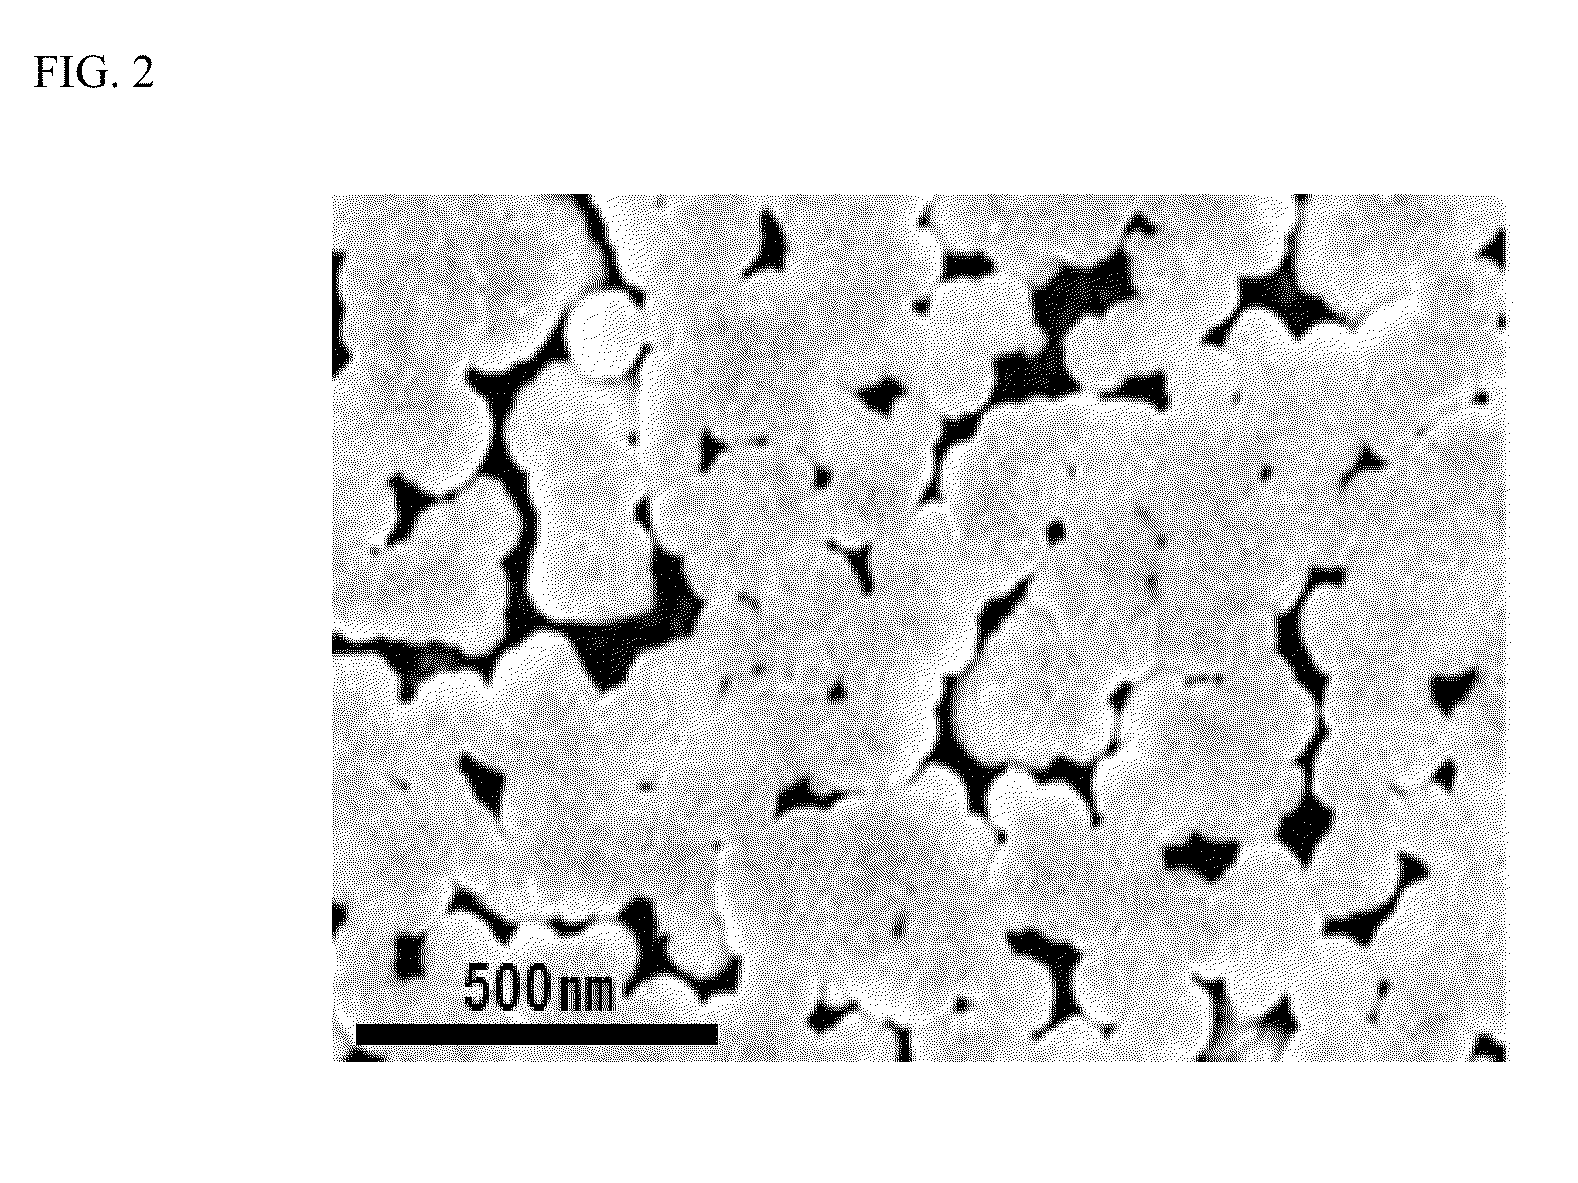 Method of manufacturing nanoparticles using ion exchange resin and liquid reducing process